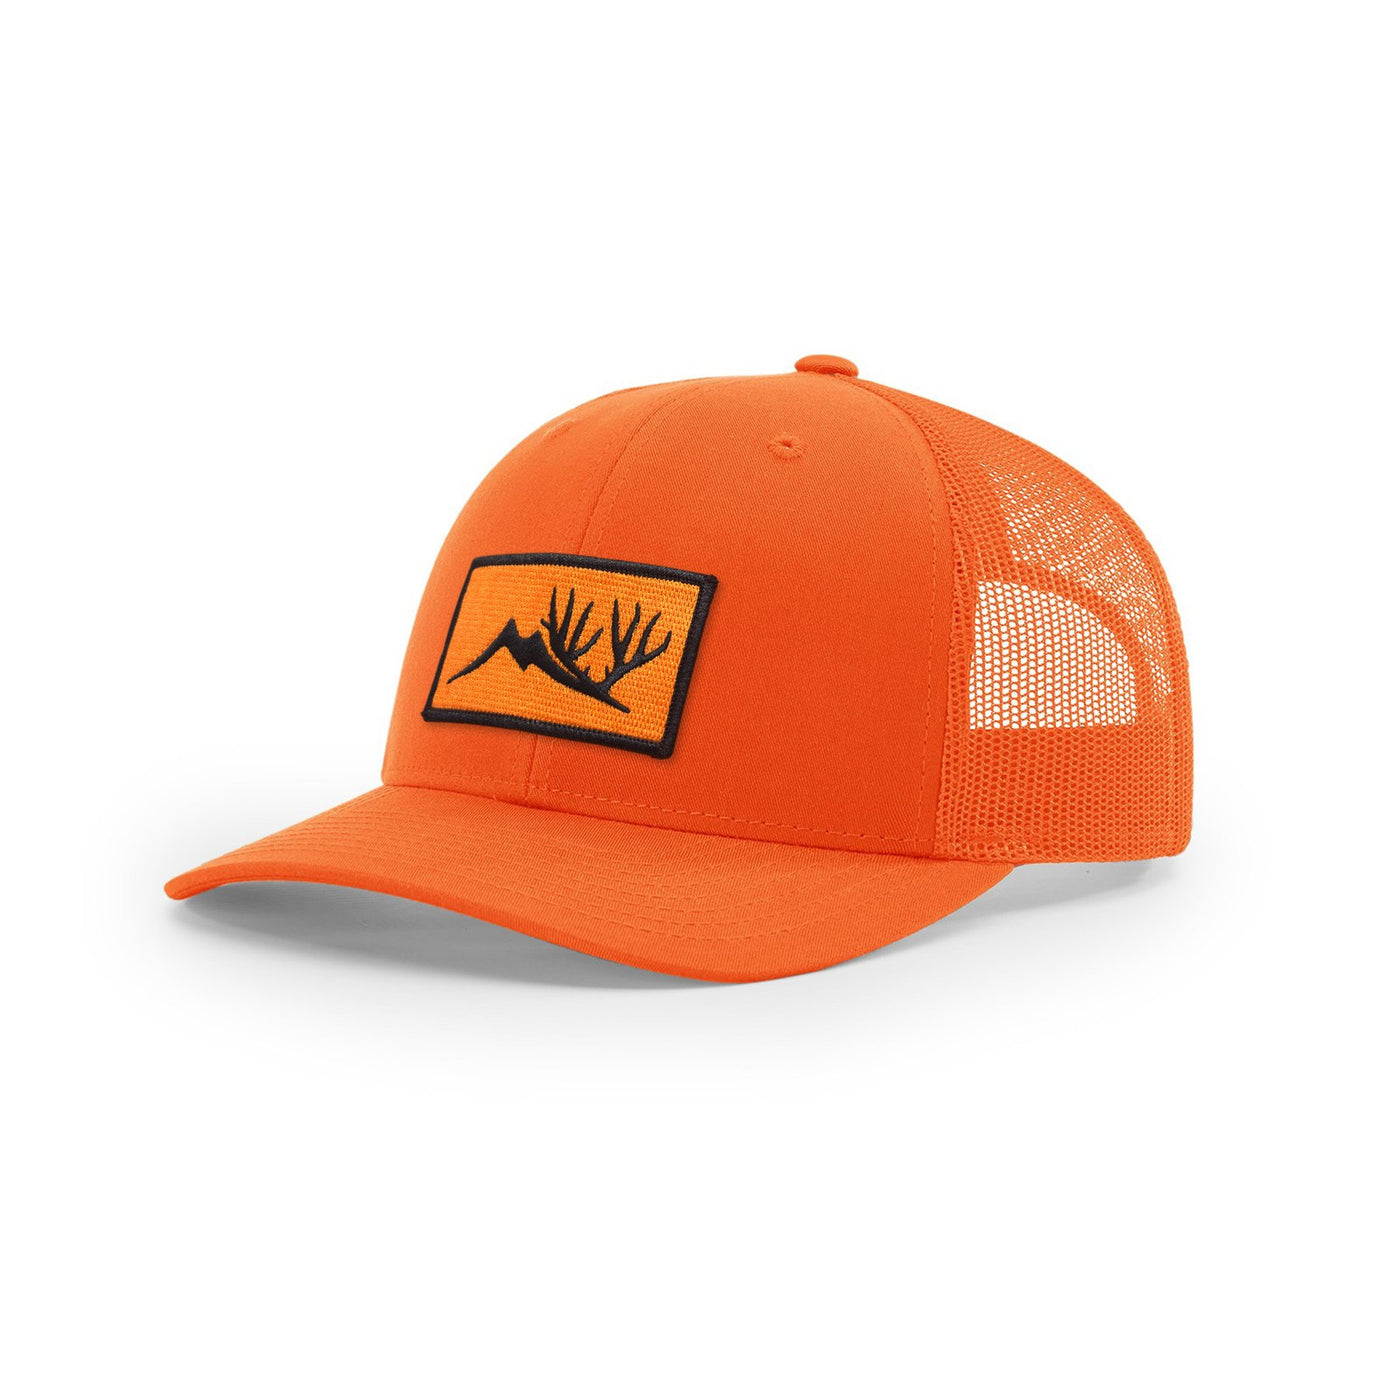 Orange Ball cap with Altitude Outdoors Logo on the Forehead